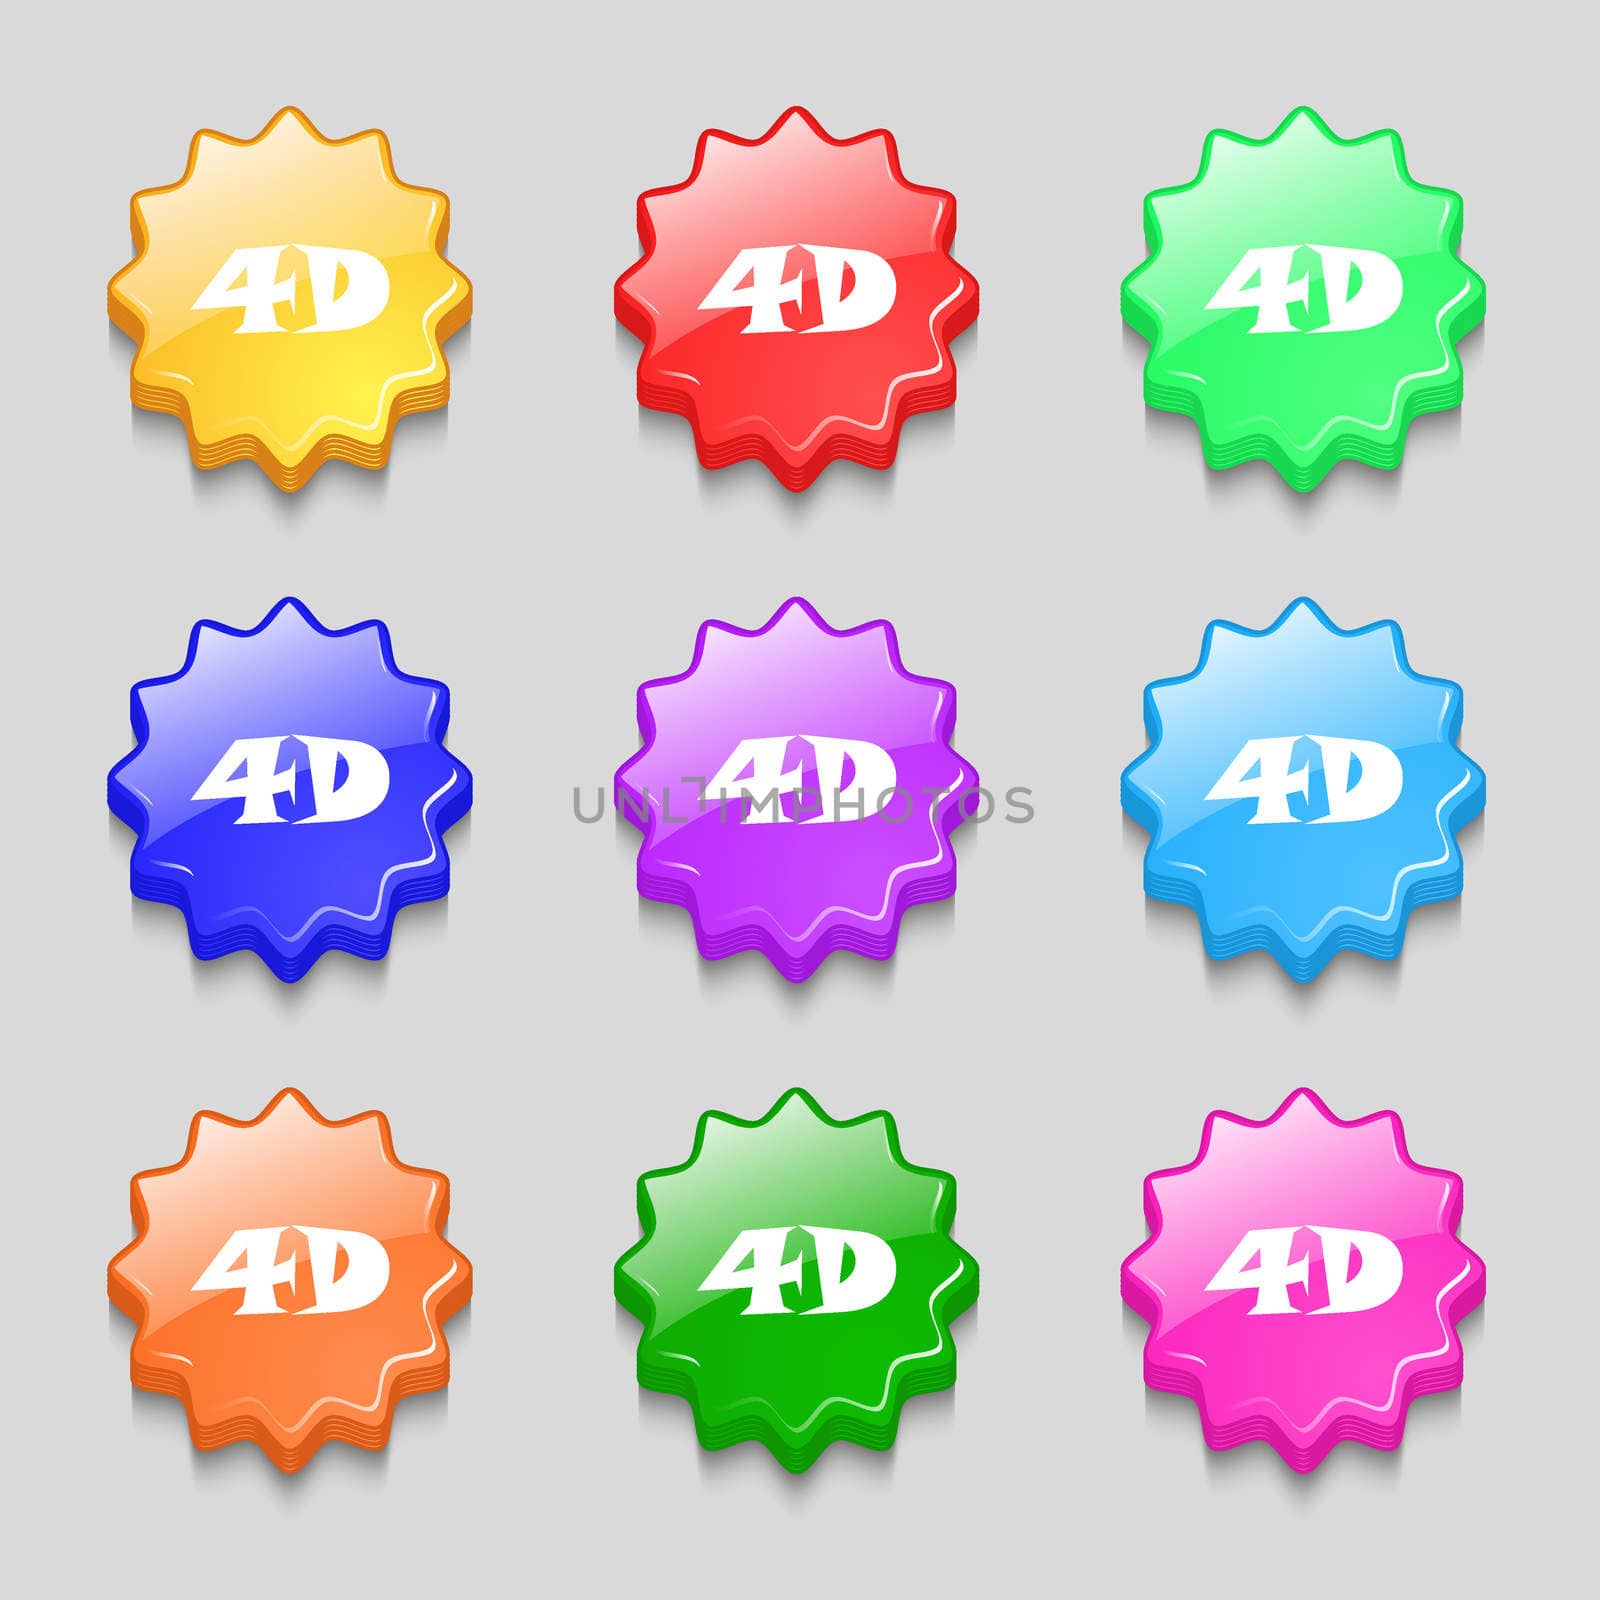 4D sign icon. 4D New technology symbol. Symbols on nine wavy colourful buttons. illustration